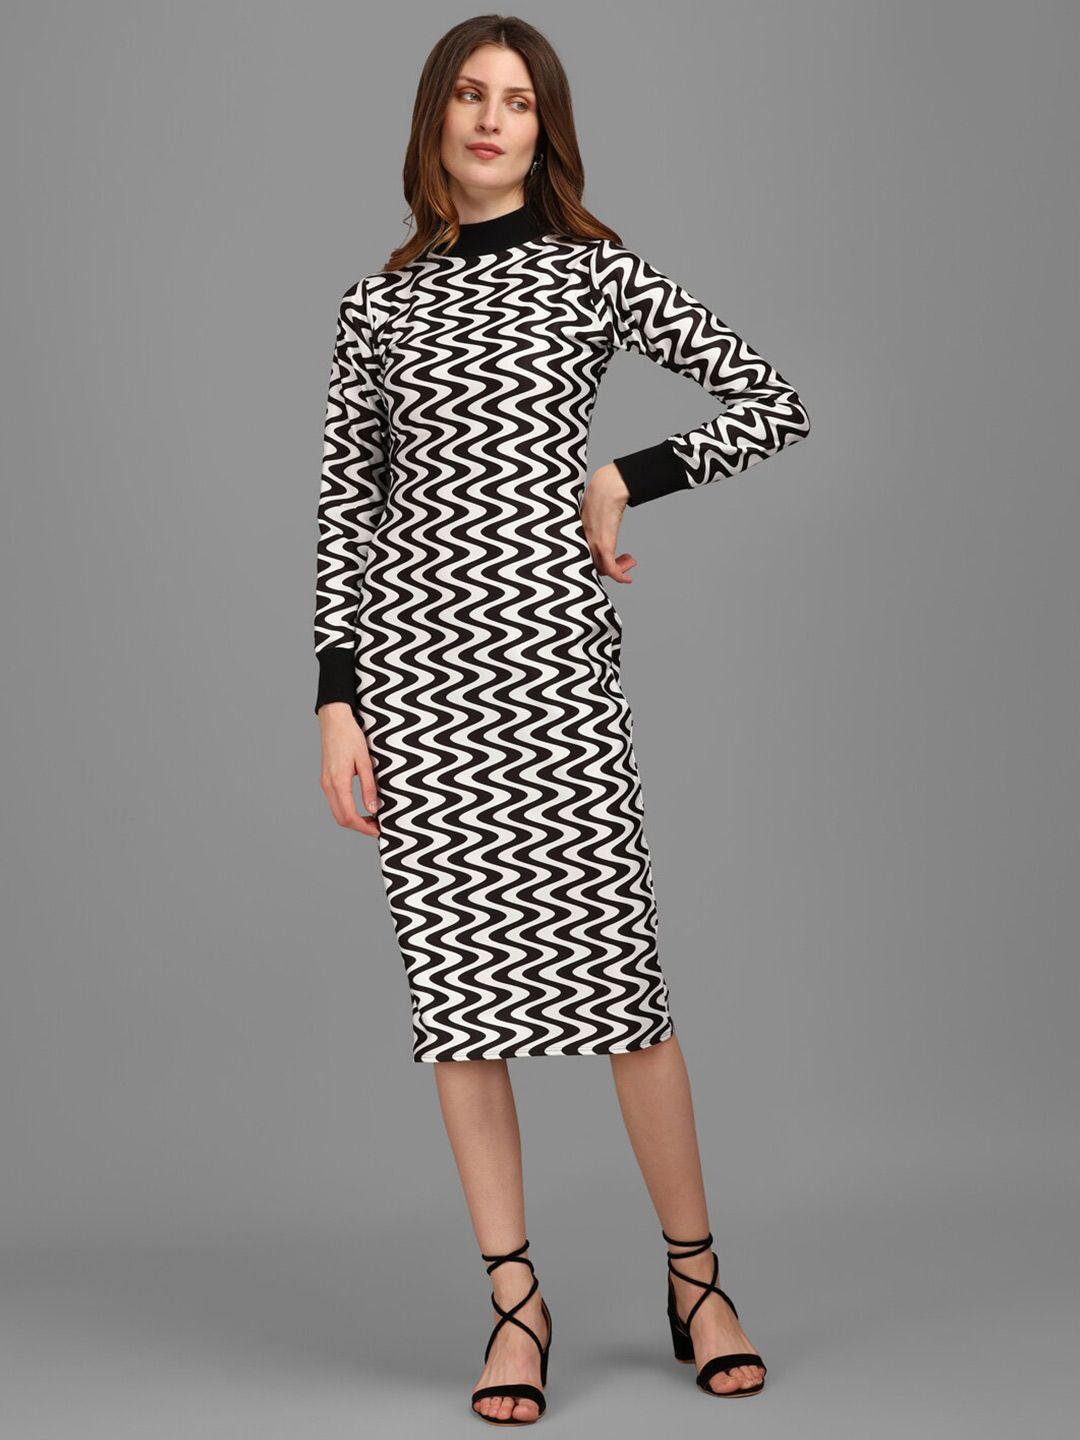 purvaja black printed with wavy patterned bodycon dress